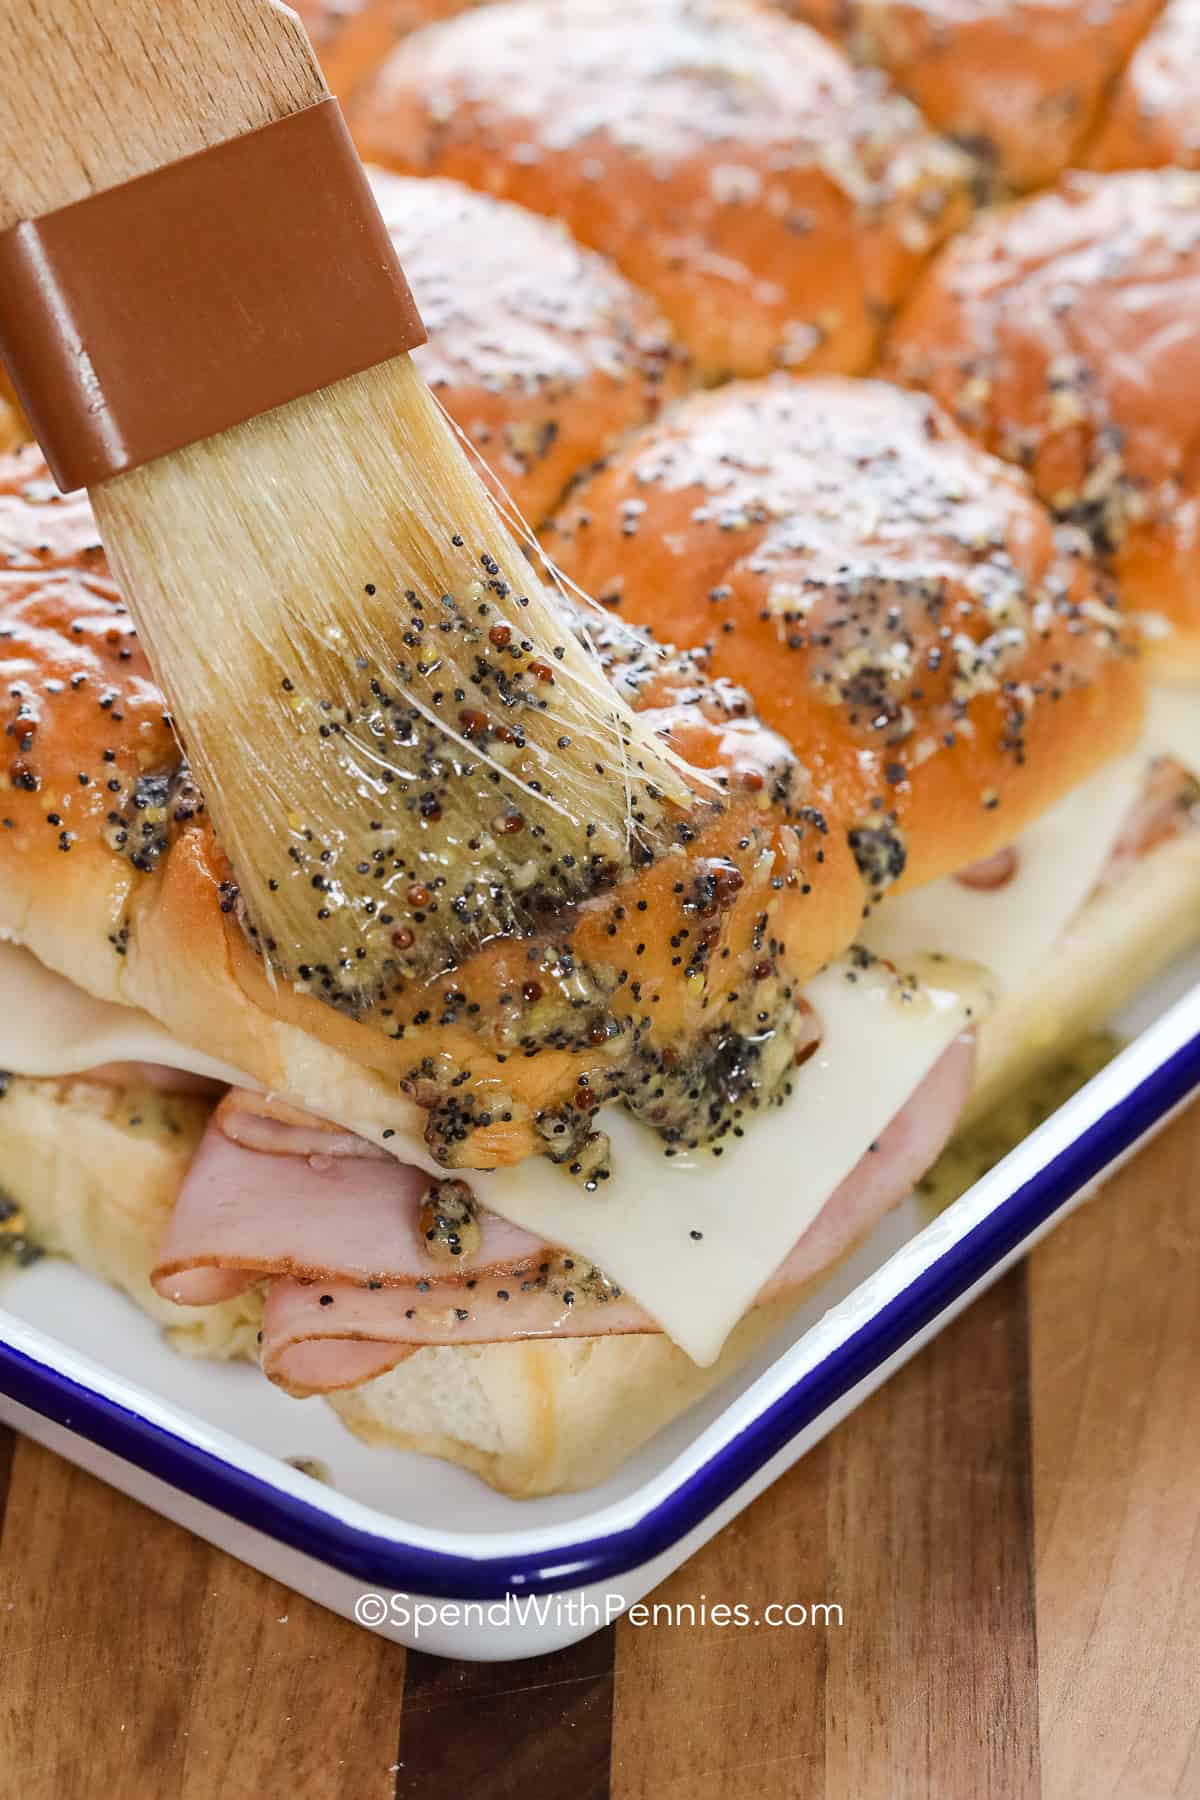 brushing butter over uncooked ham and cheese sliders